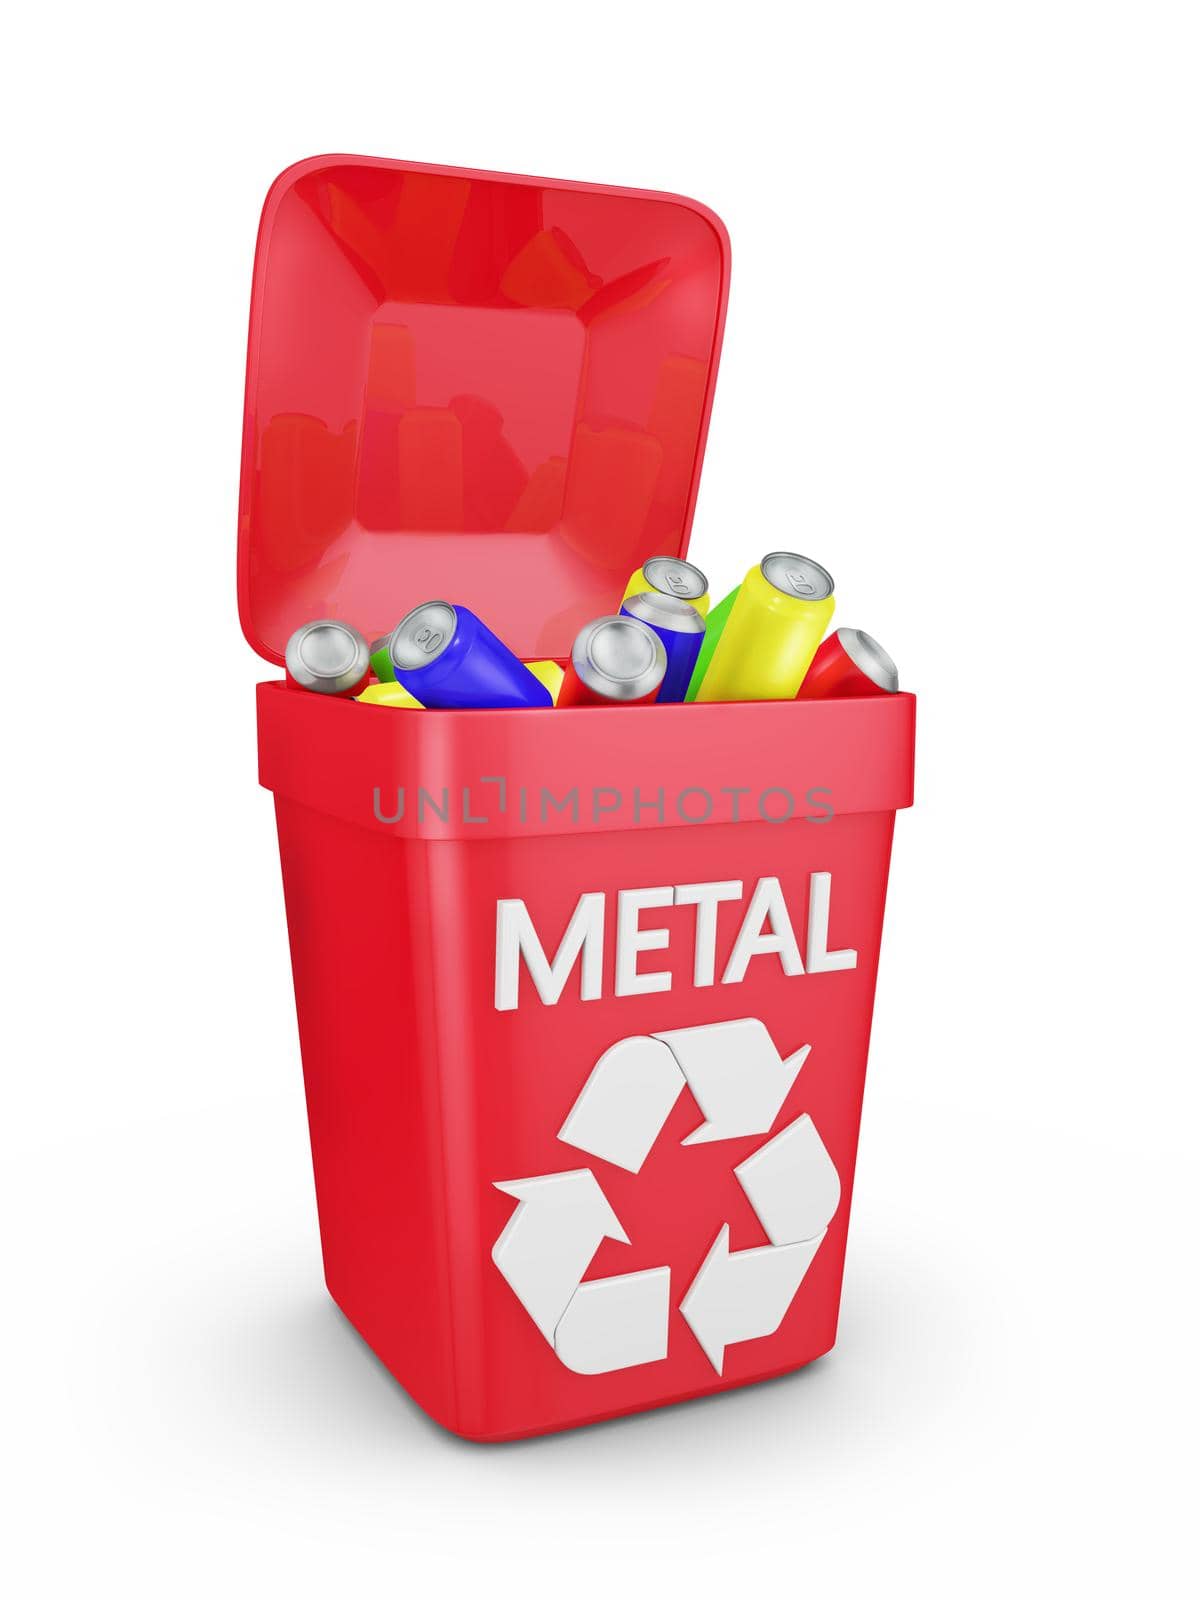 metallic waste container on a white background